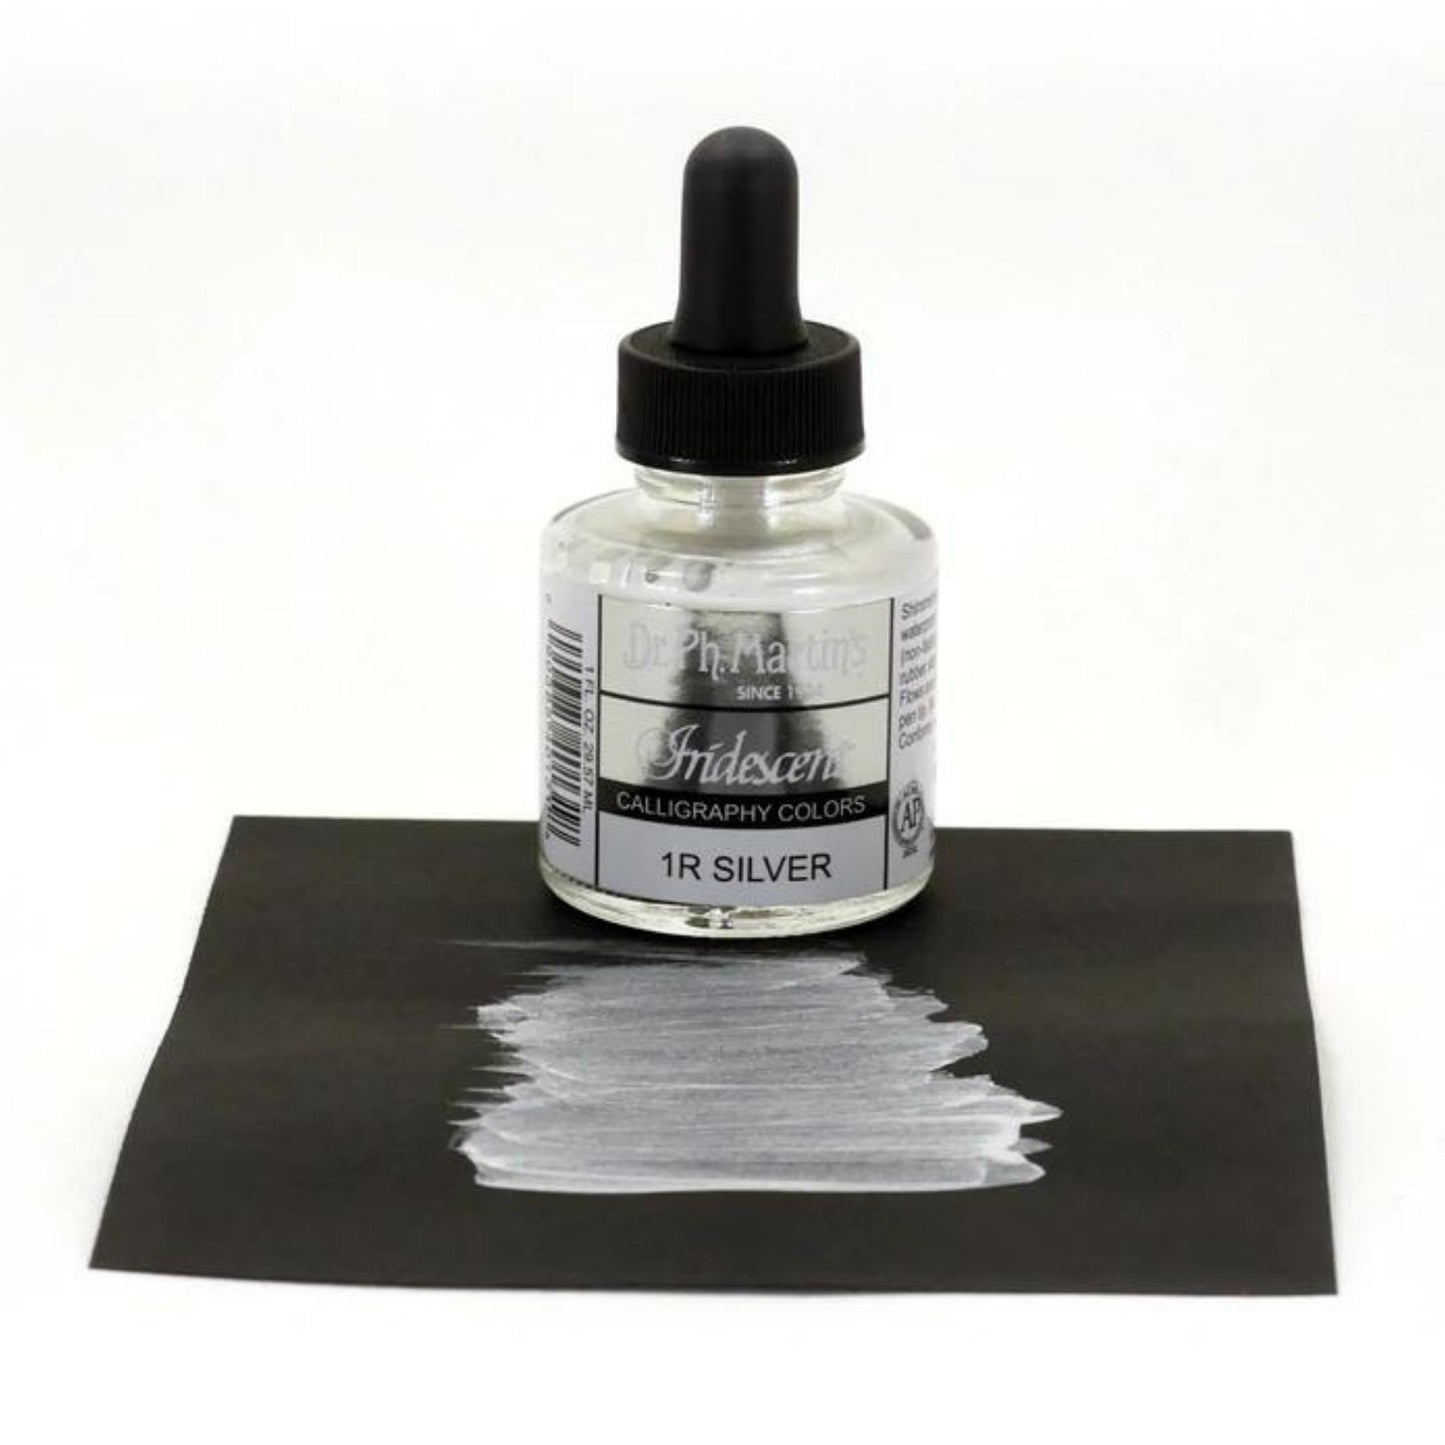 Dr.Ph.Martins - Iridescent Calligraphy: 1R Silver